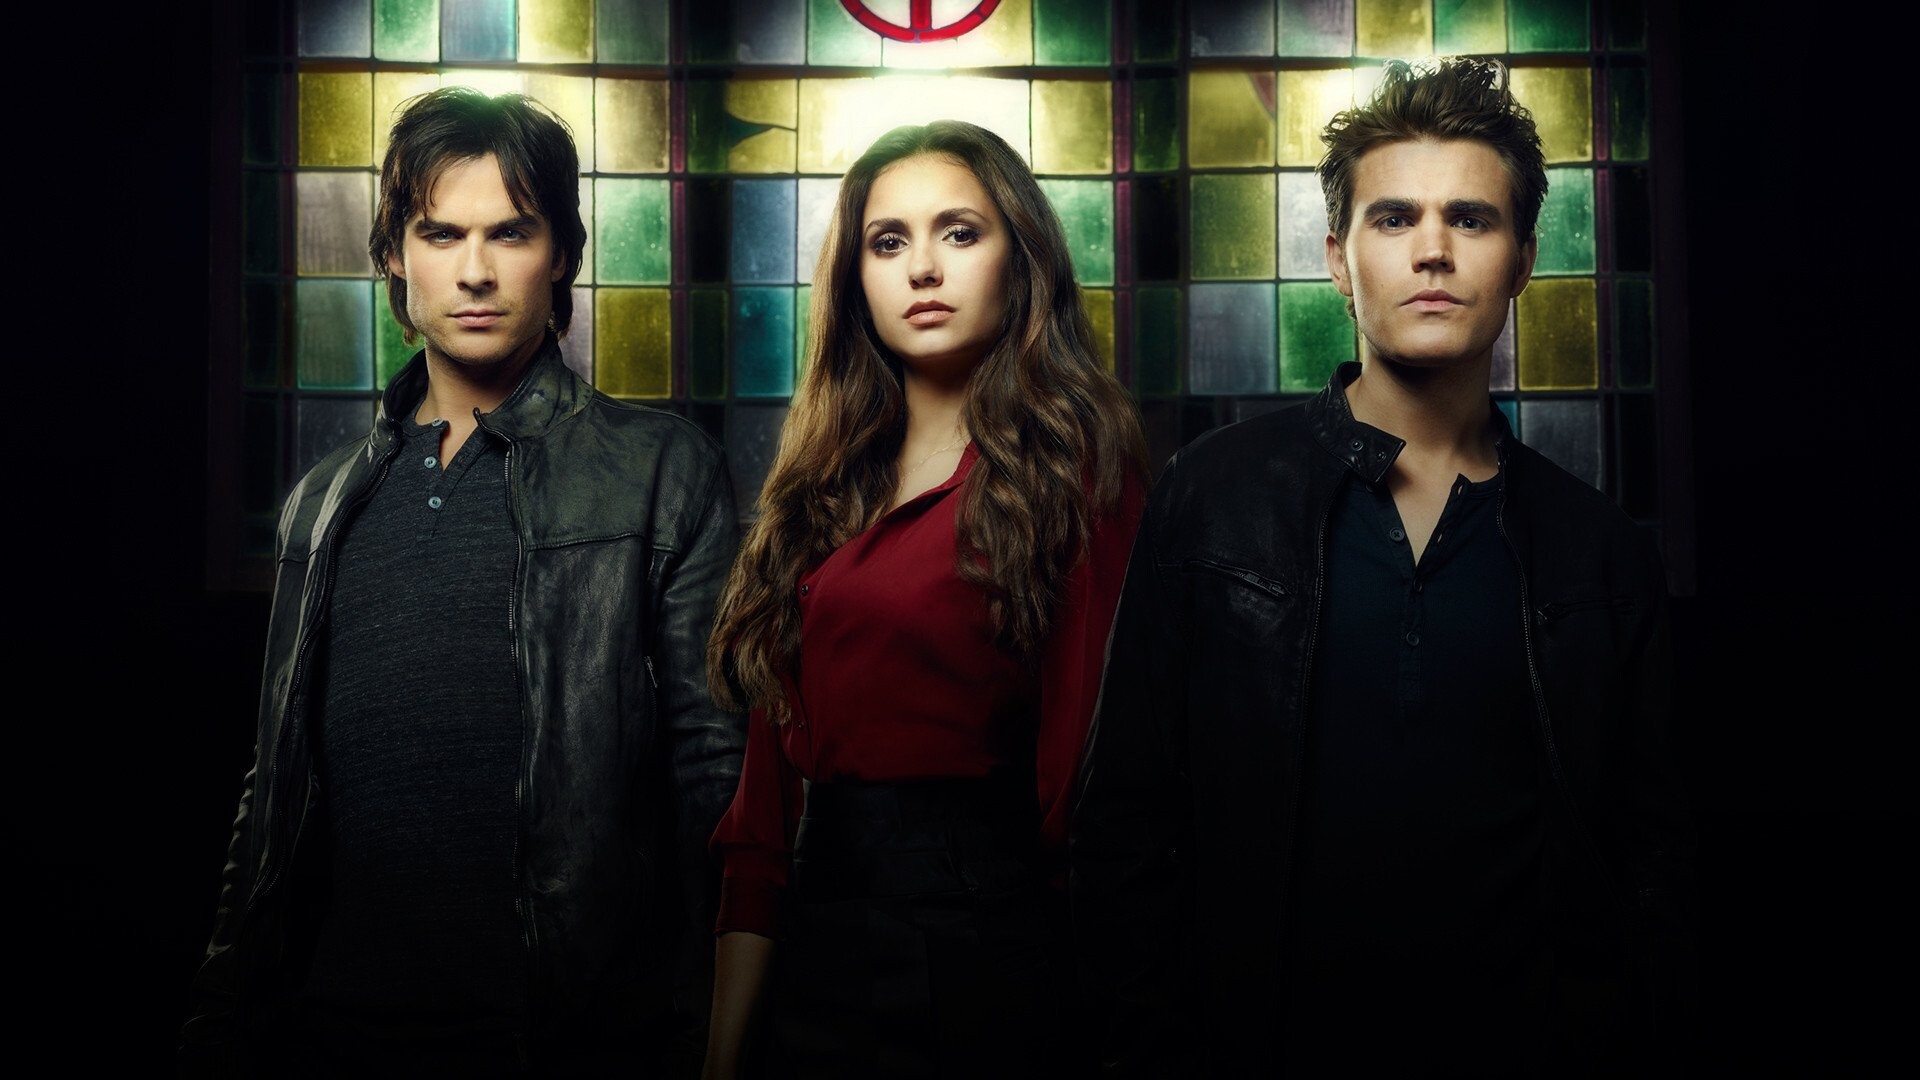 The Vampire Diaries (TV Series): Young Adult Vampire Fiction, Eight Seasons, Netflix, Warner Brothers Television Distribution. 1920x1080 Full HD Background.